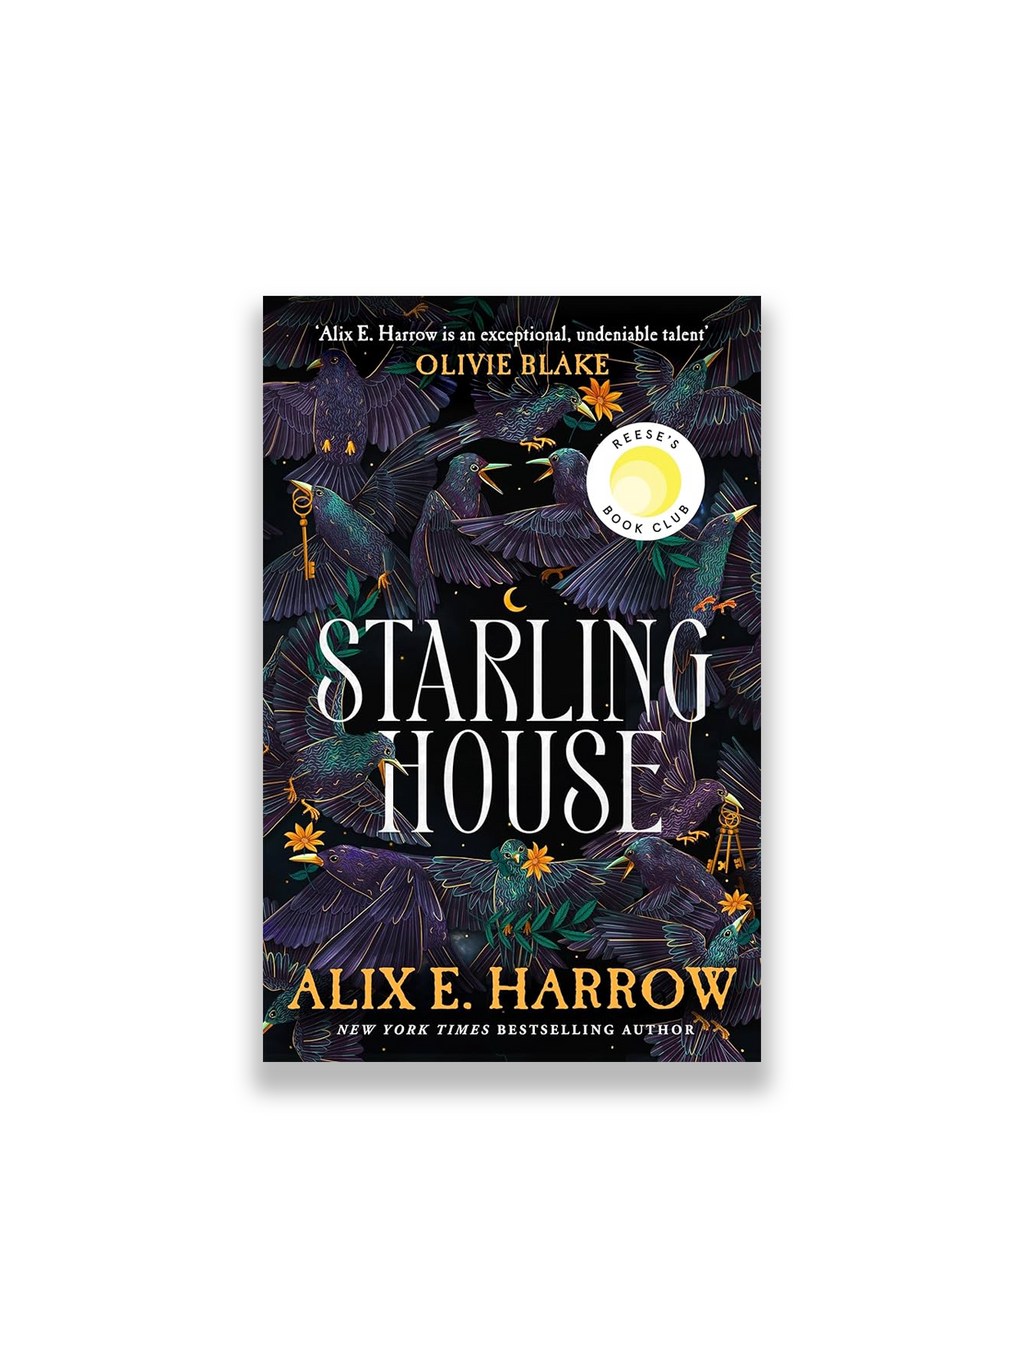 The Starling House